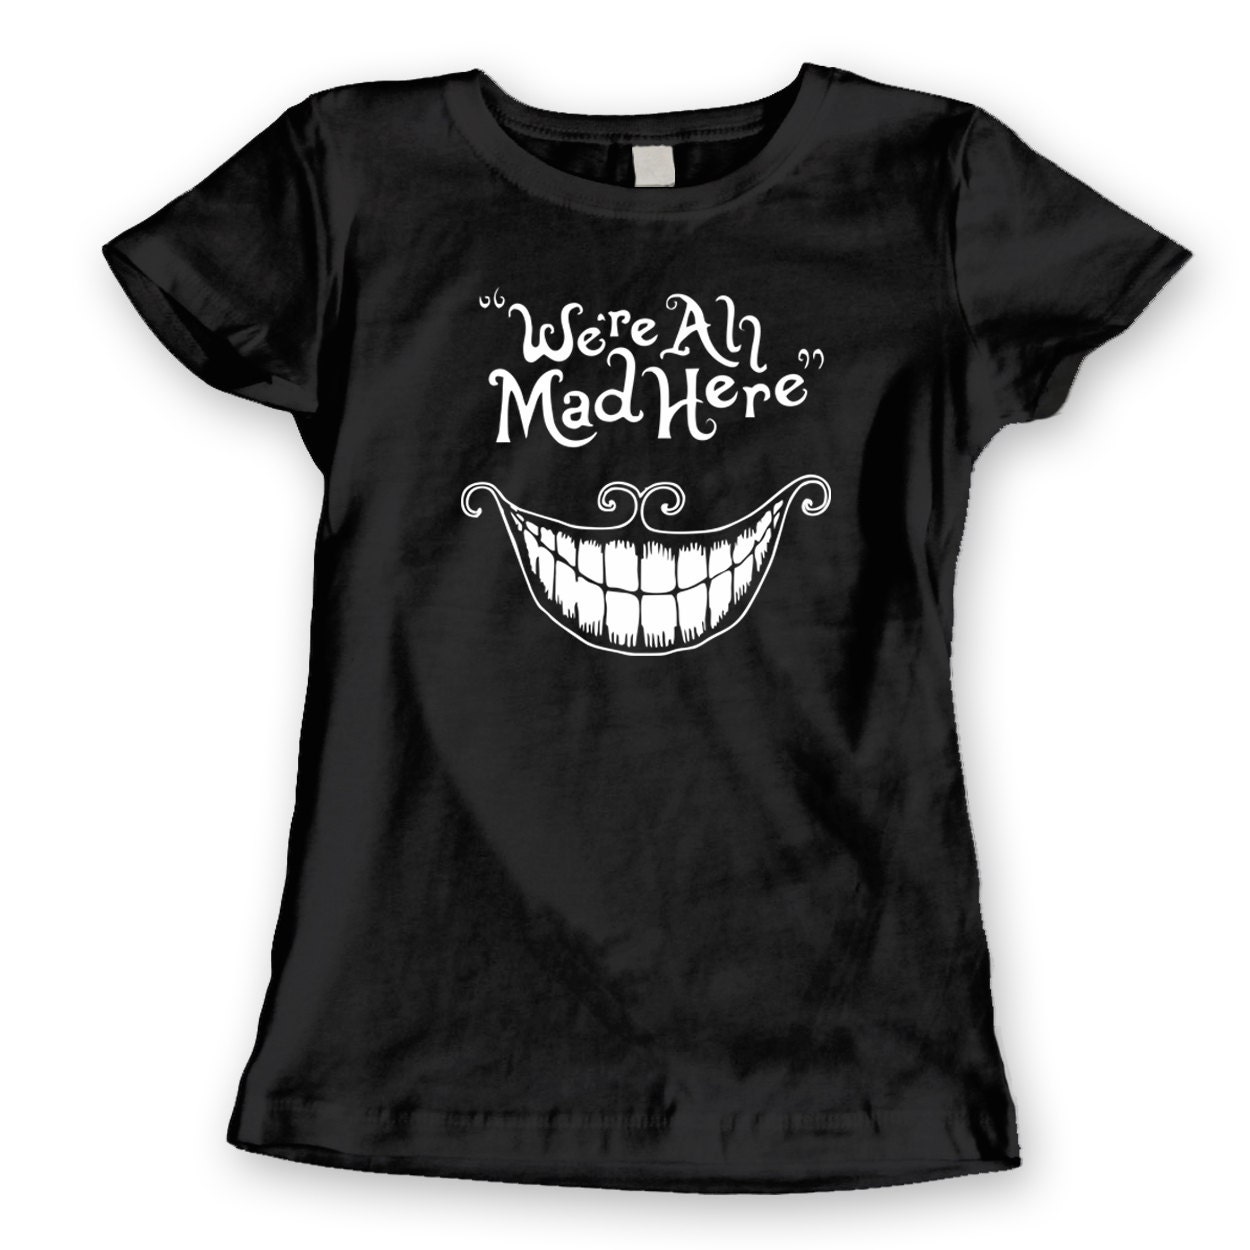 We're All Mad Here Funny Movie Women's Jr Fit T-Shirt by LaughWear